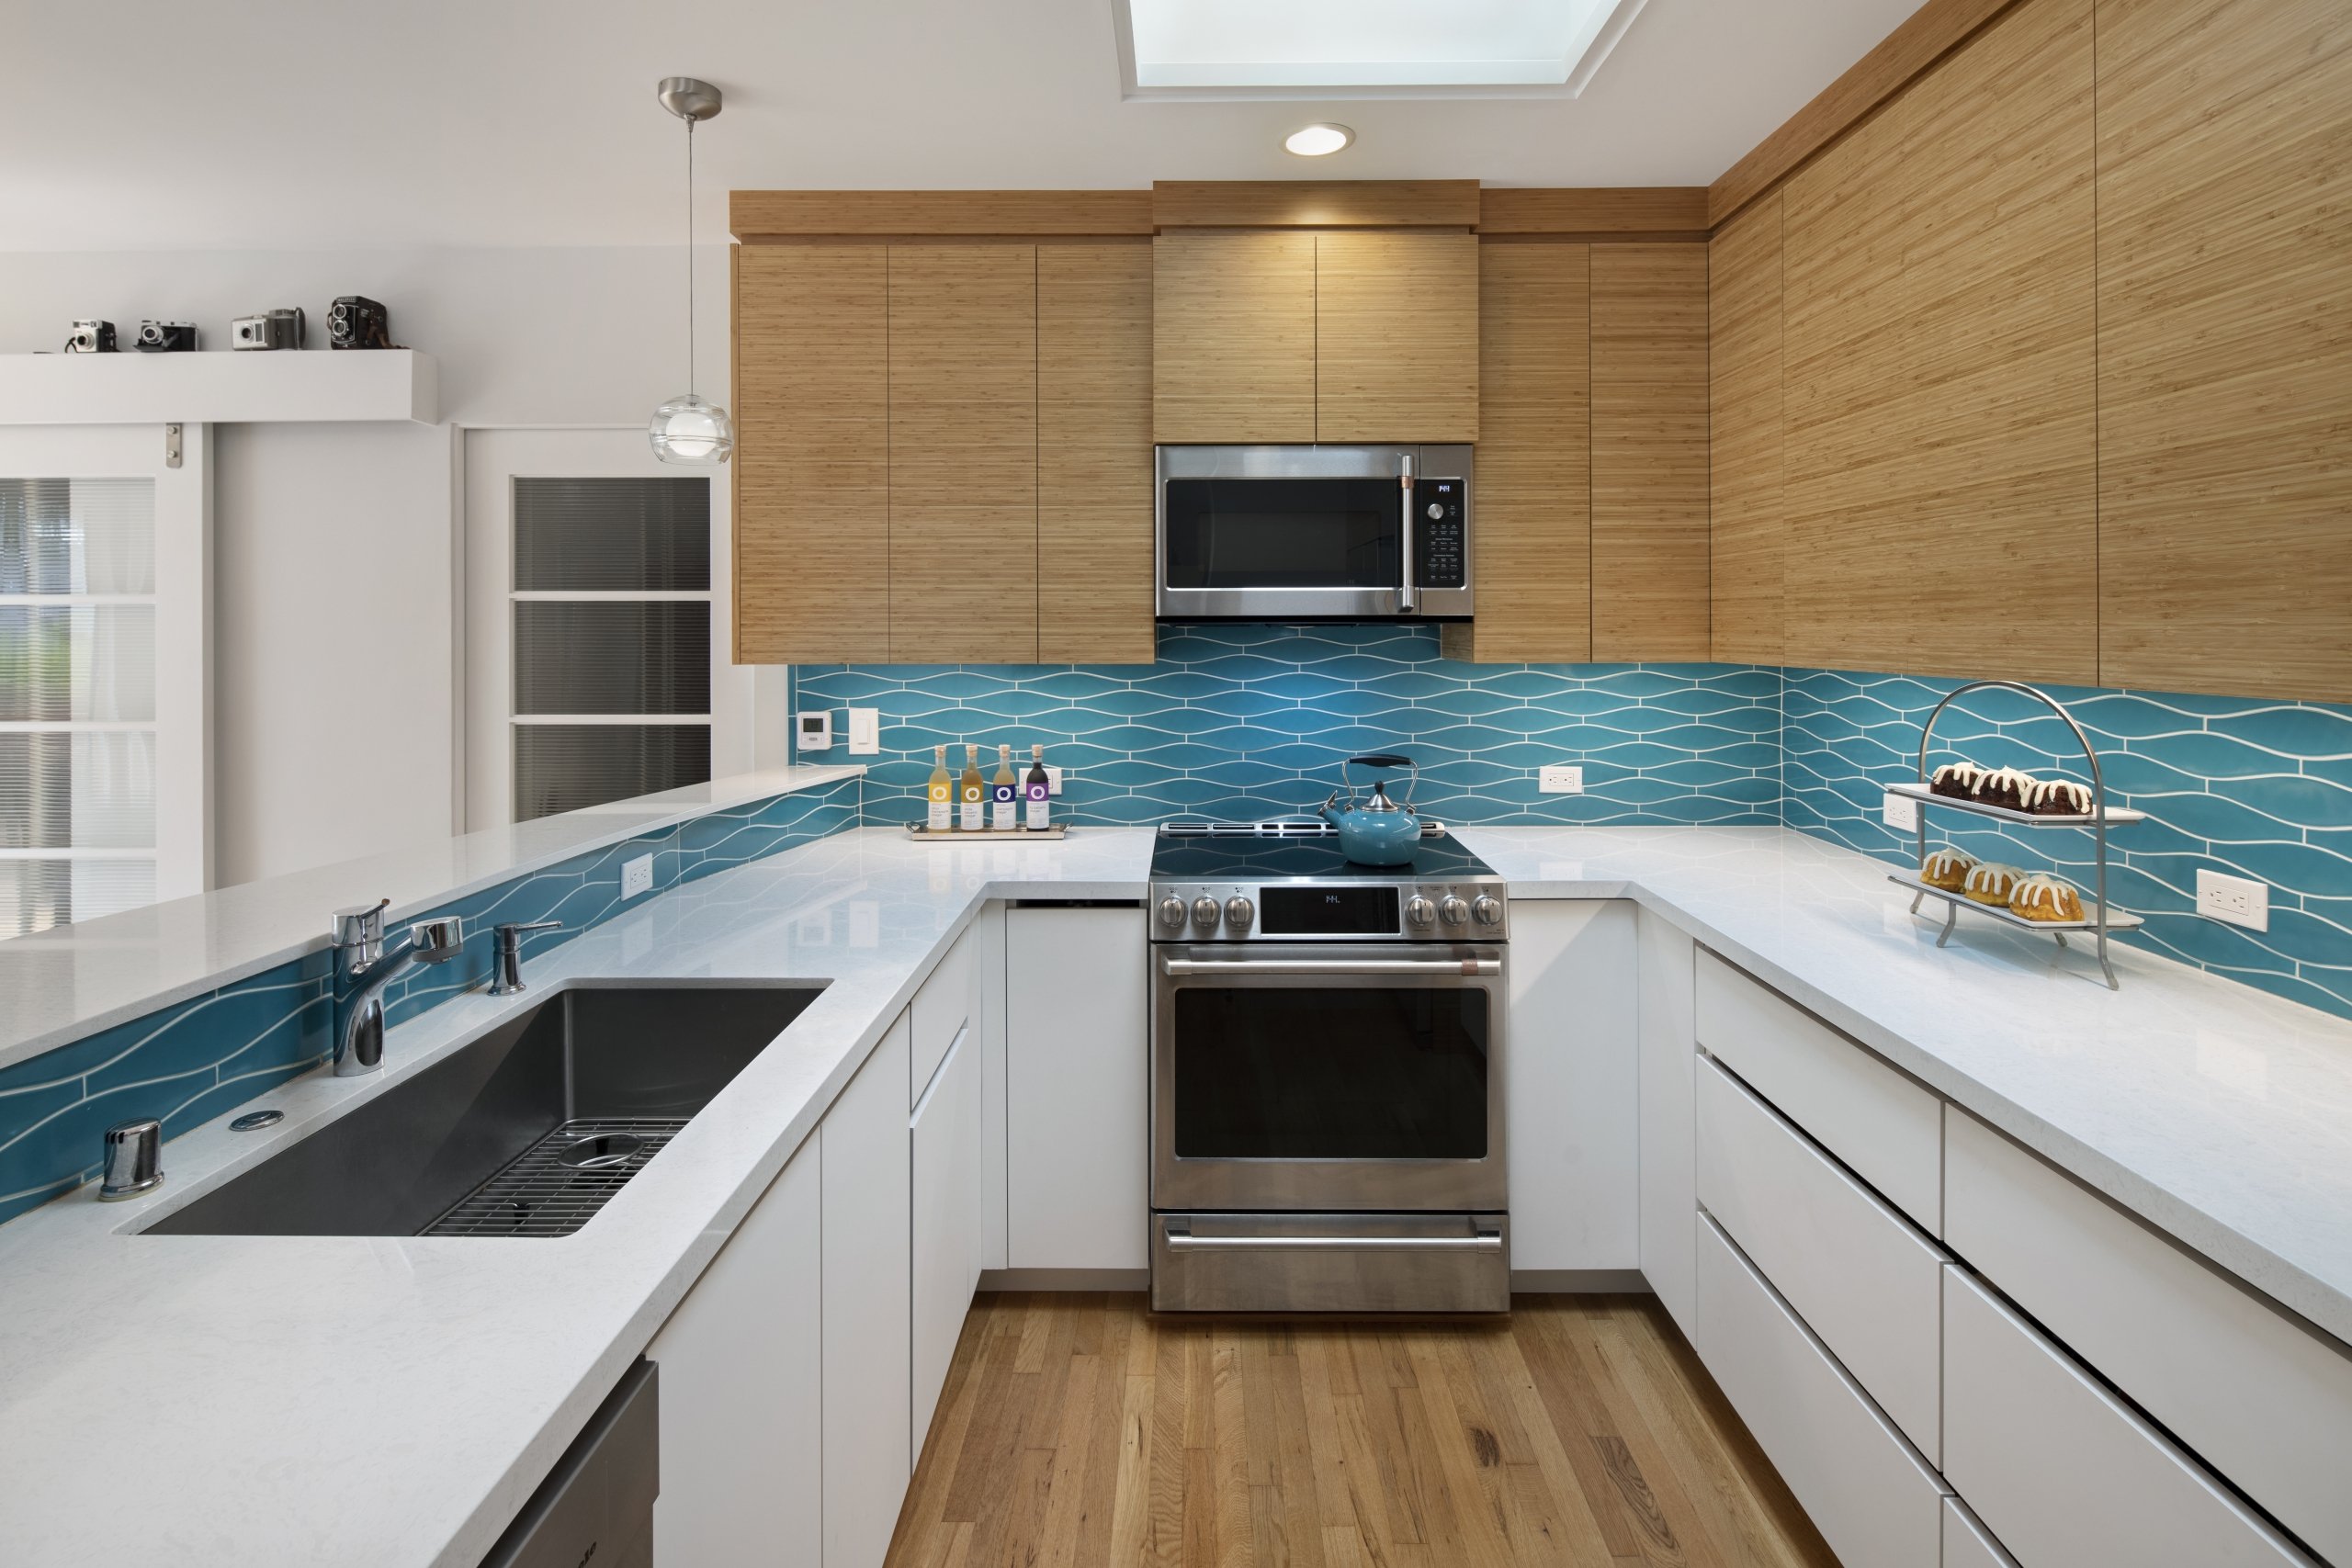 A modern Mountain View kitchen features a pop of color with its geometric tiled backsplash.